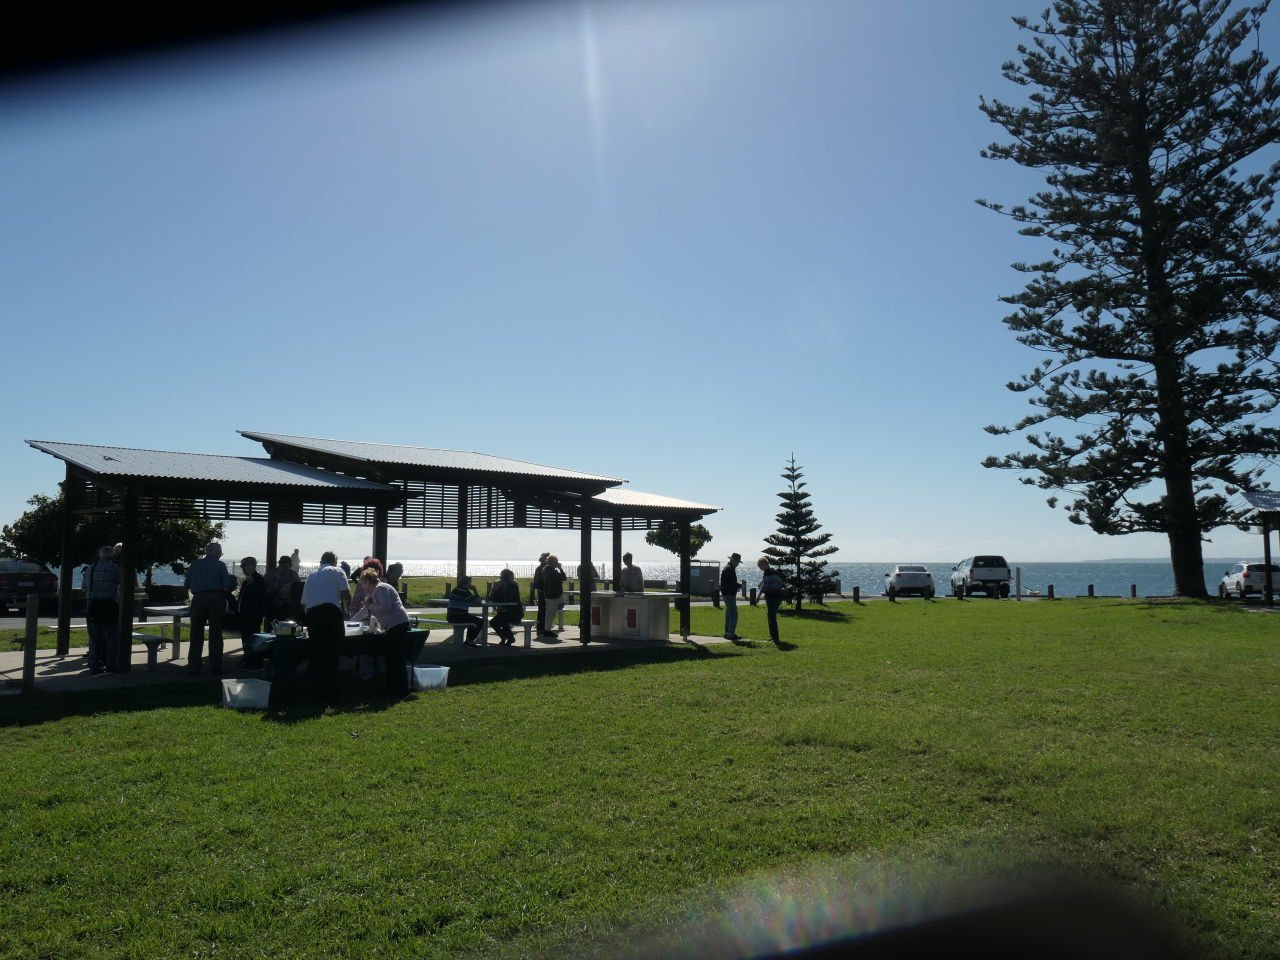 Redlands Museum Coach - 18 May 21.
Morning Tea at Cleveland Point